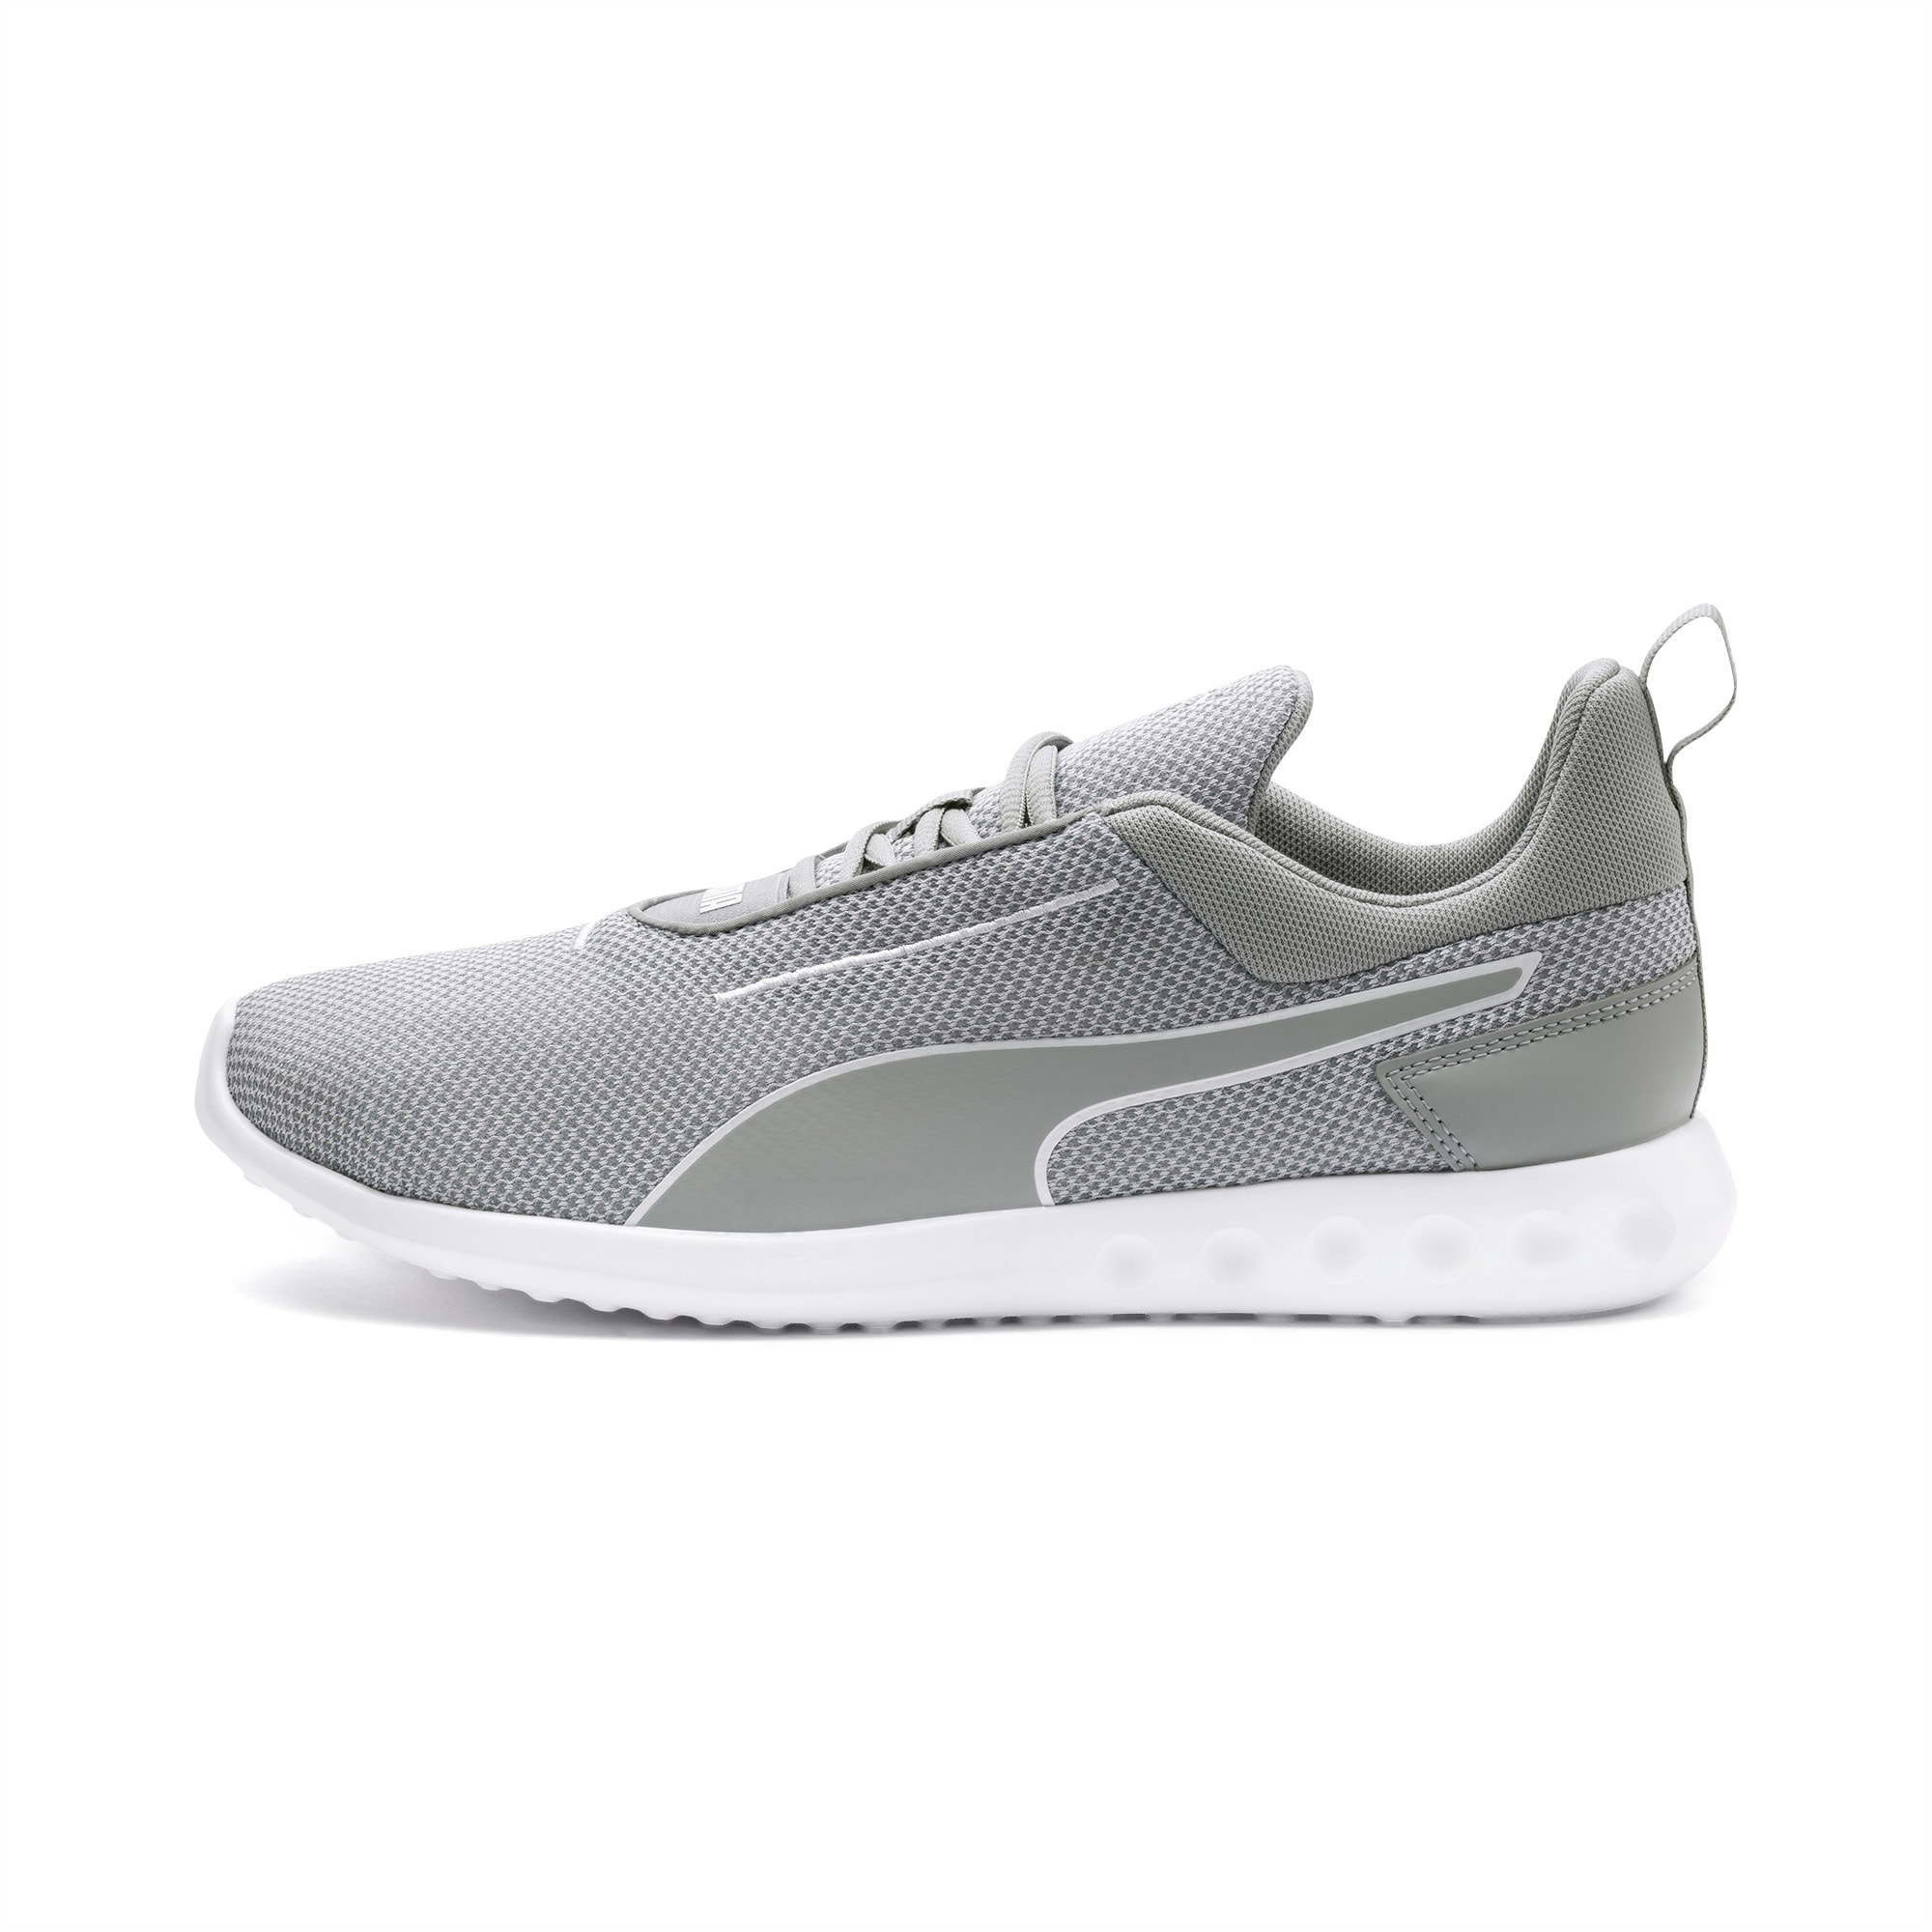 Concave Pro X Running Shoes | PUMA